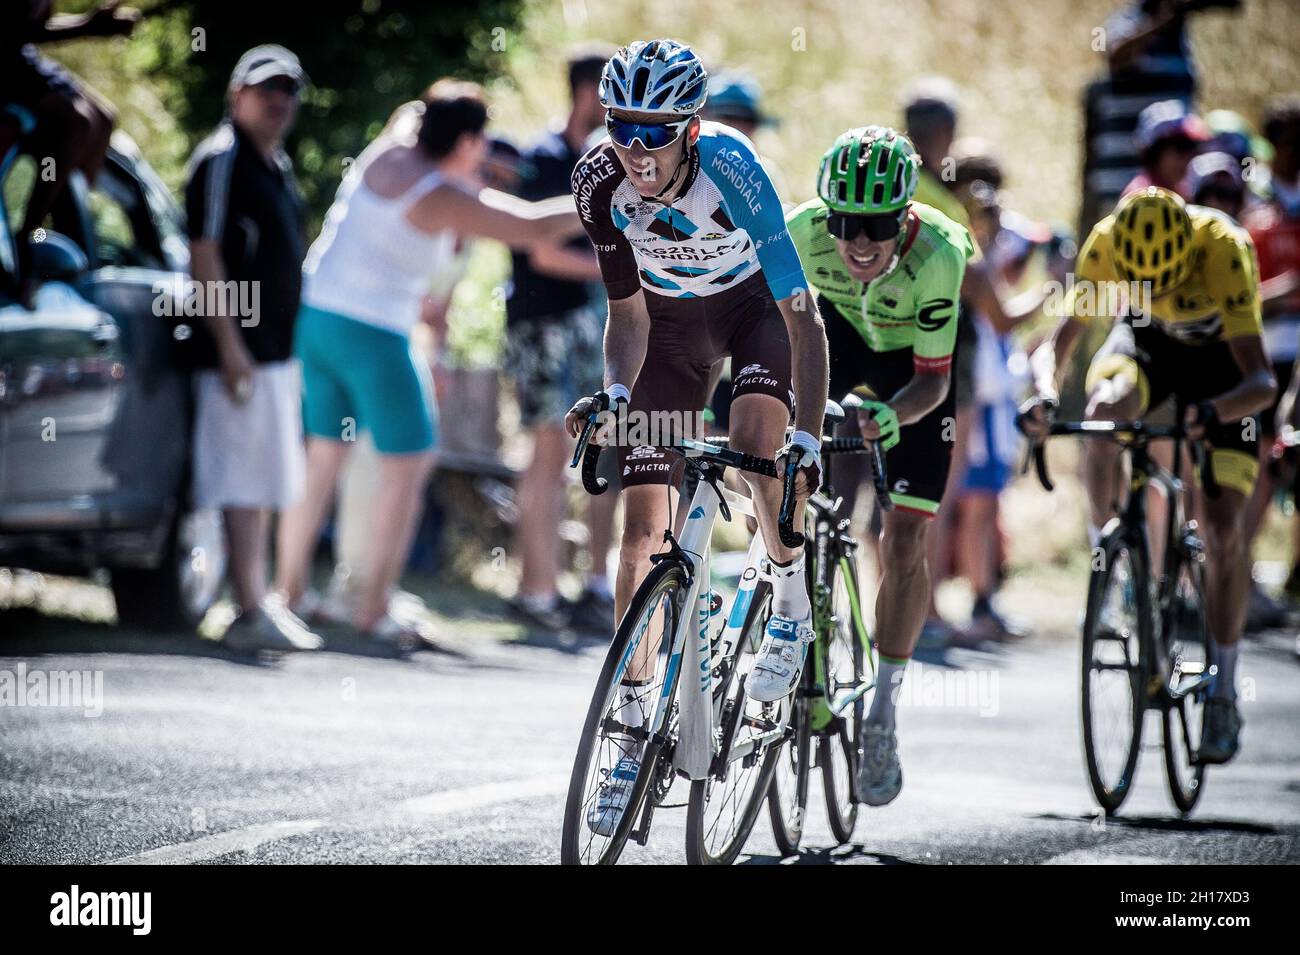 July 16th 2017, France; Cycling, Tour de France Stage 15: Romain Bardet leads Rigoberto Uran and Chris Froome over a small climb 5 km from the finish Stock Photo